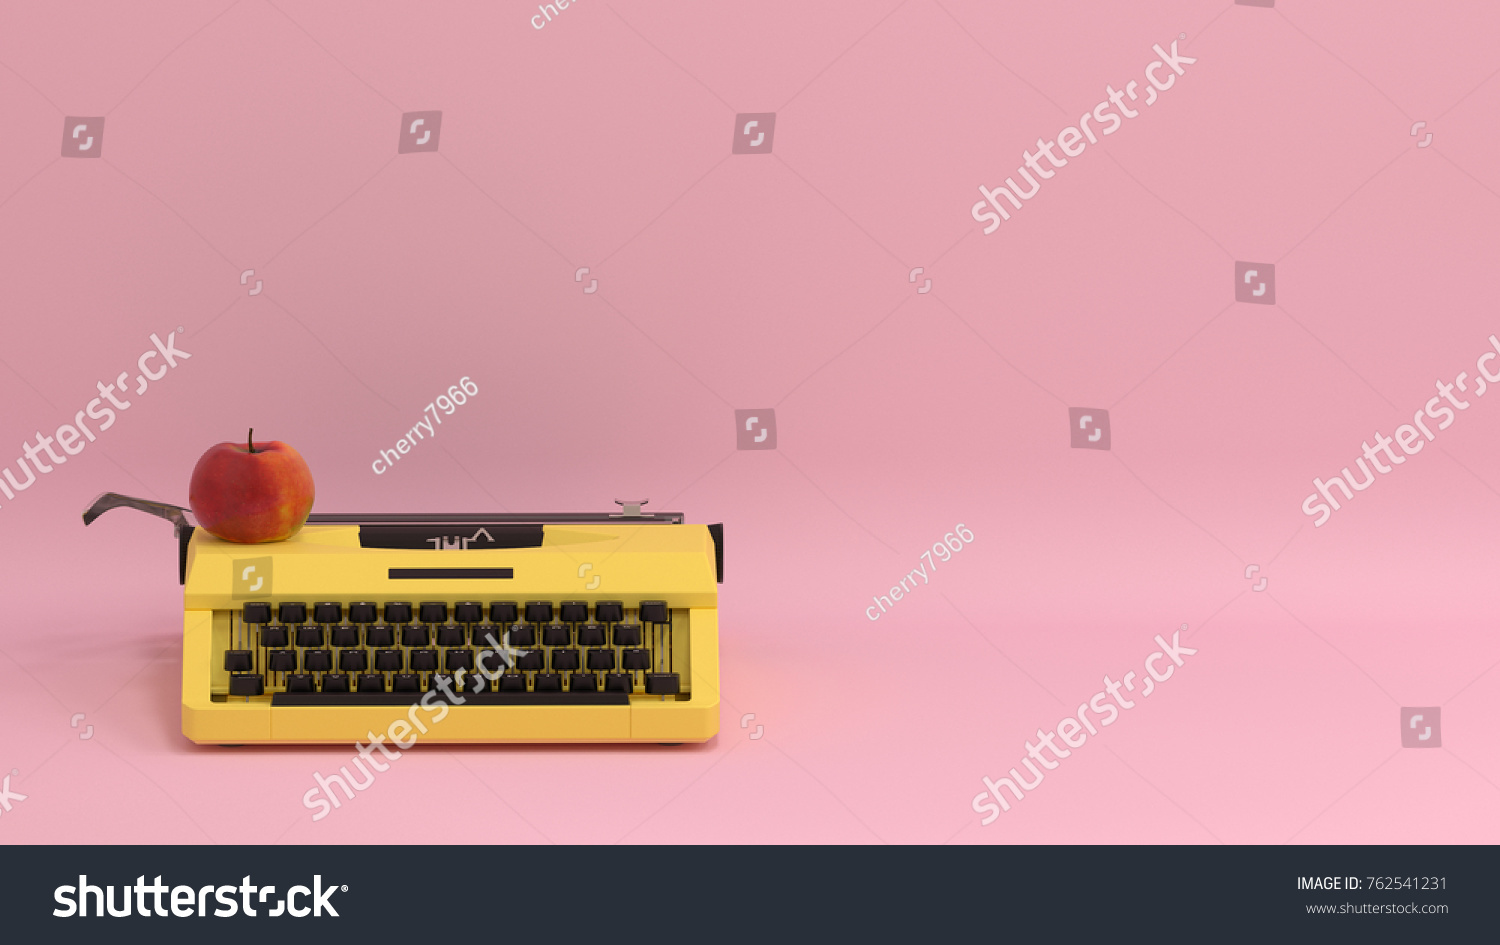 typewriter with fruit apple on the table colorful education in front of pink wall lovely picture for copy space minimal fruit and object concept pastel colorful lovely art #762541231